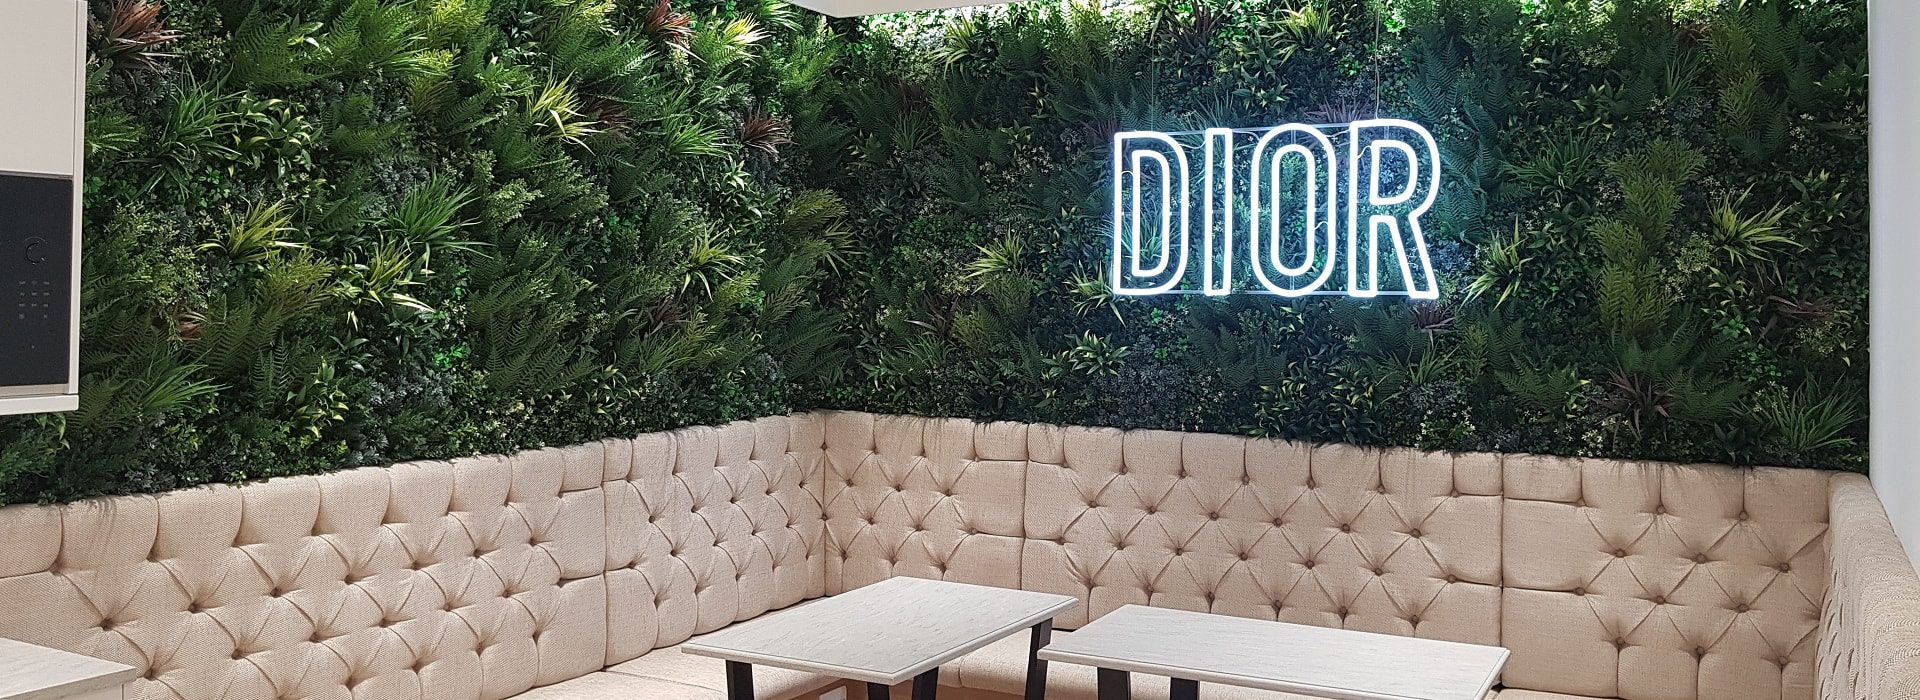 Christian Dior Flagship Store Green Wall in London, UK